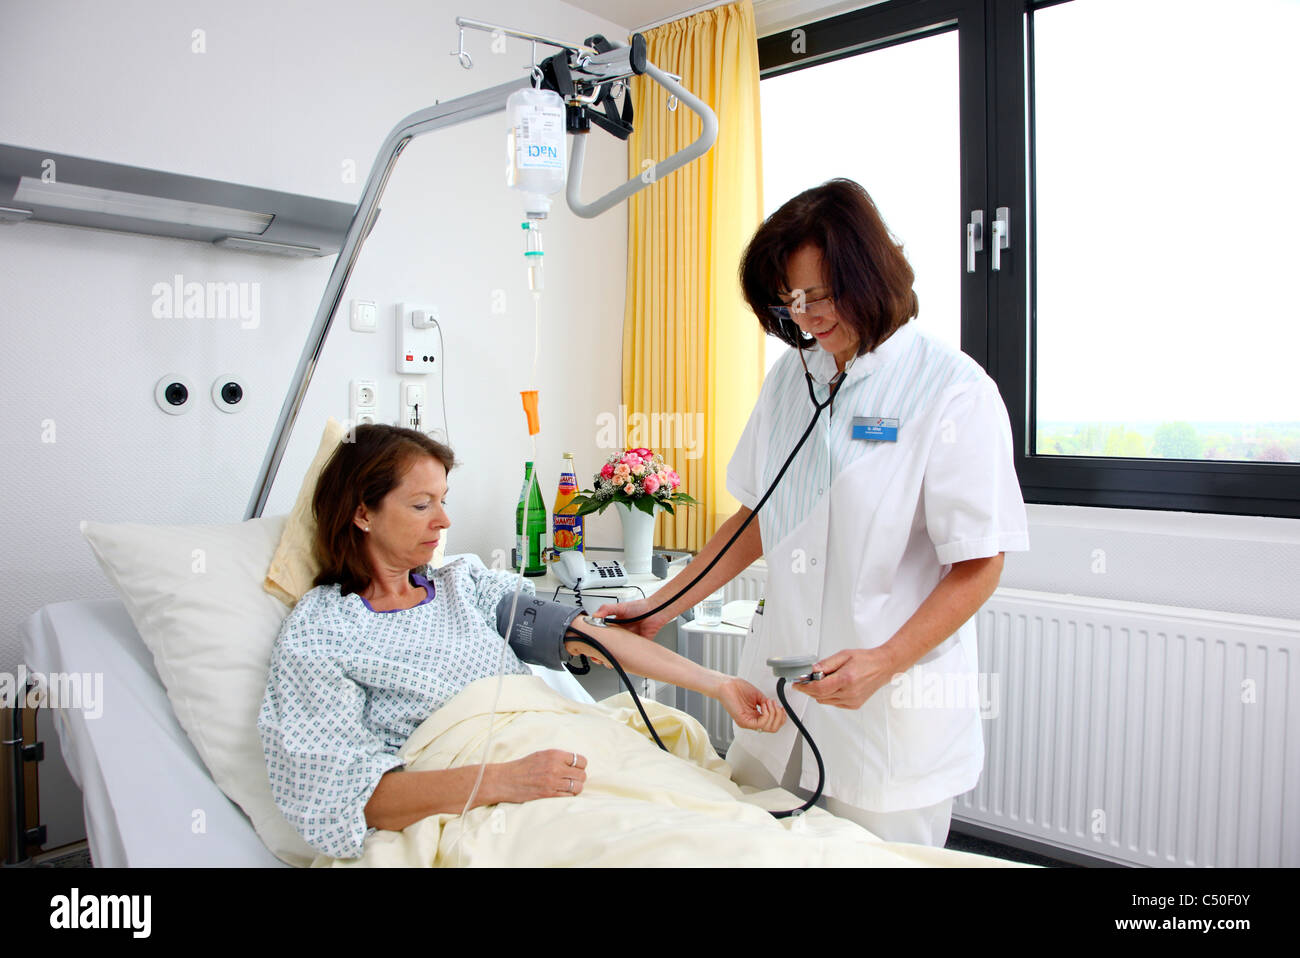 Hospital. Nurse is checking blood pressure of a female patient. Stock Photo